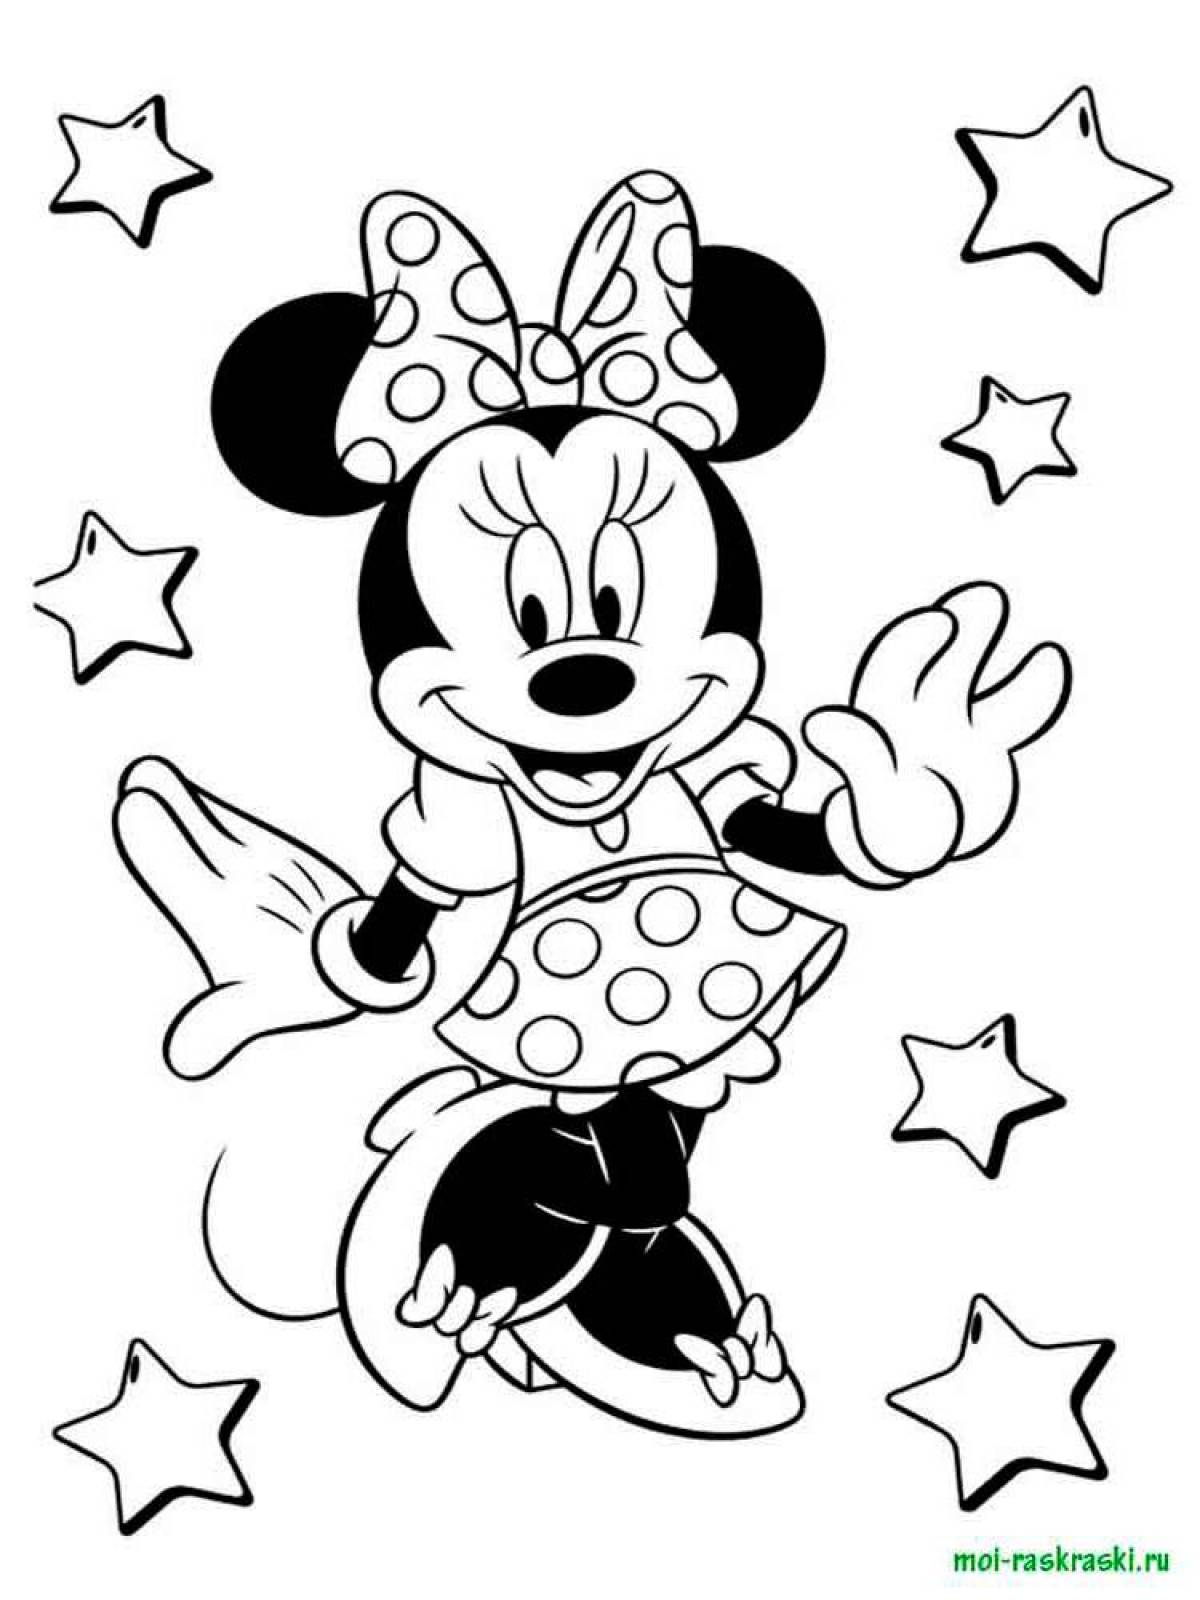 Charming mickey mouse coloring book for girls